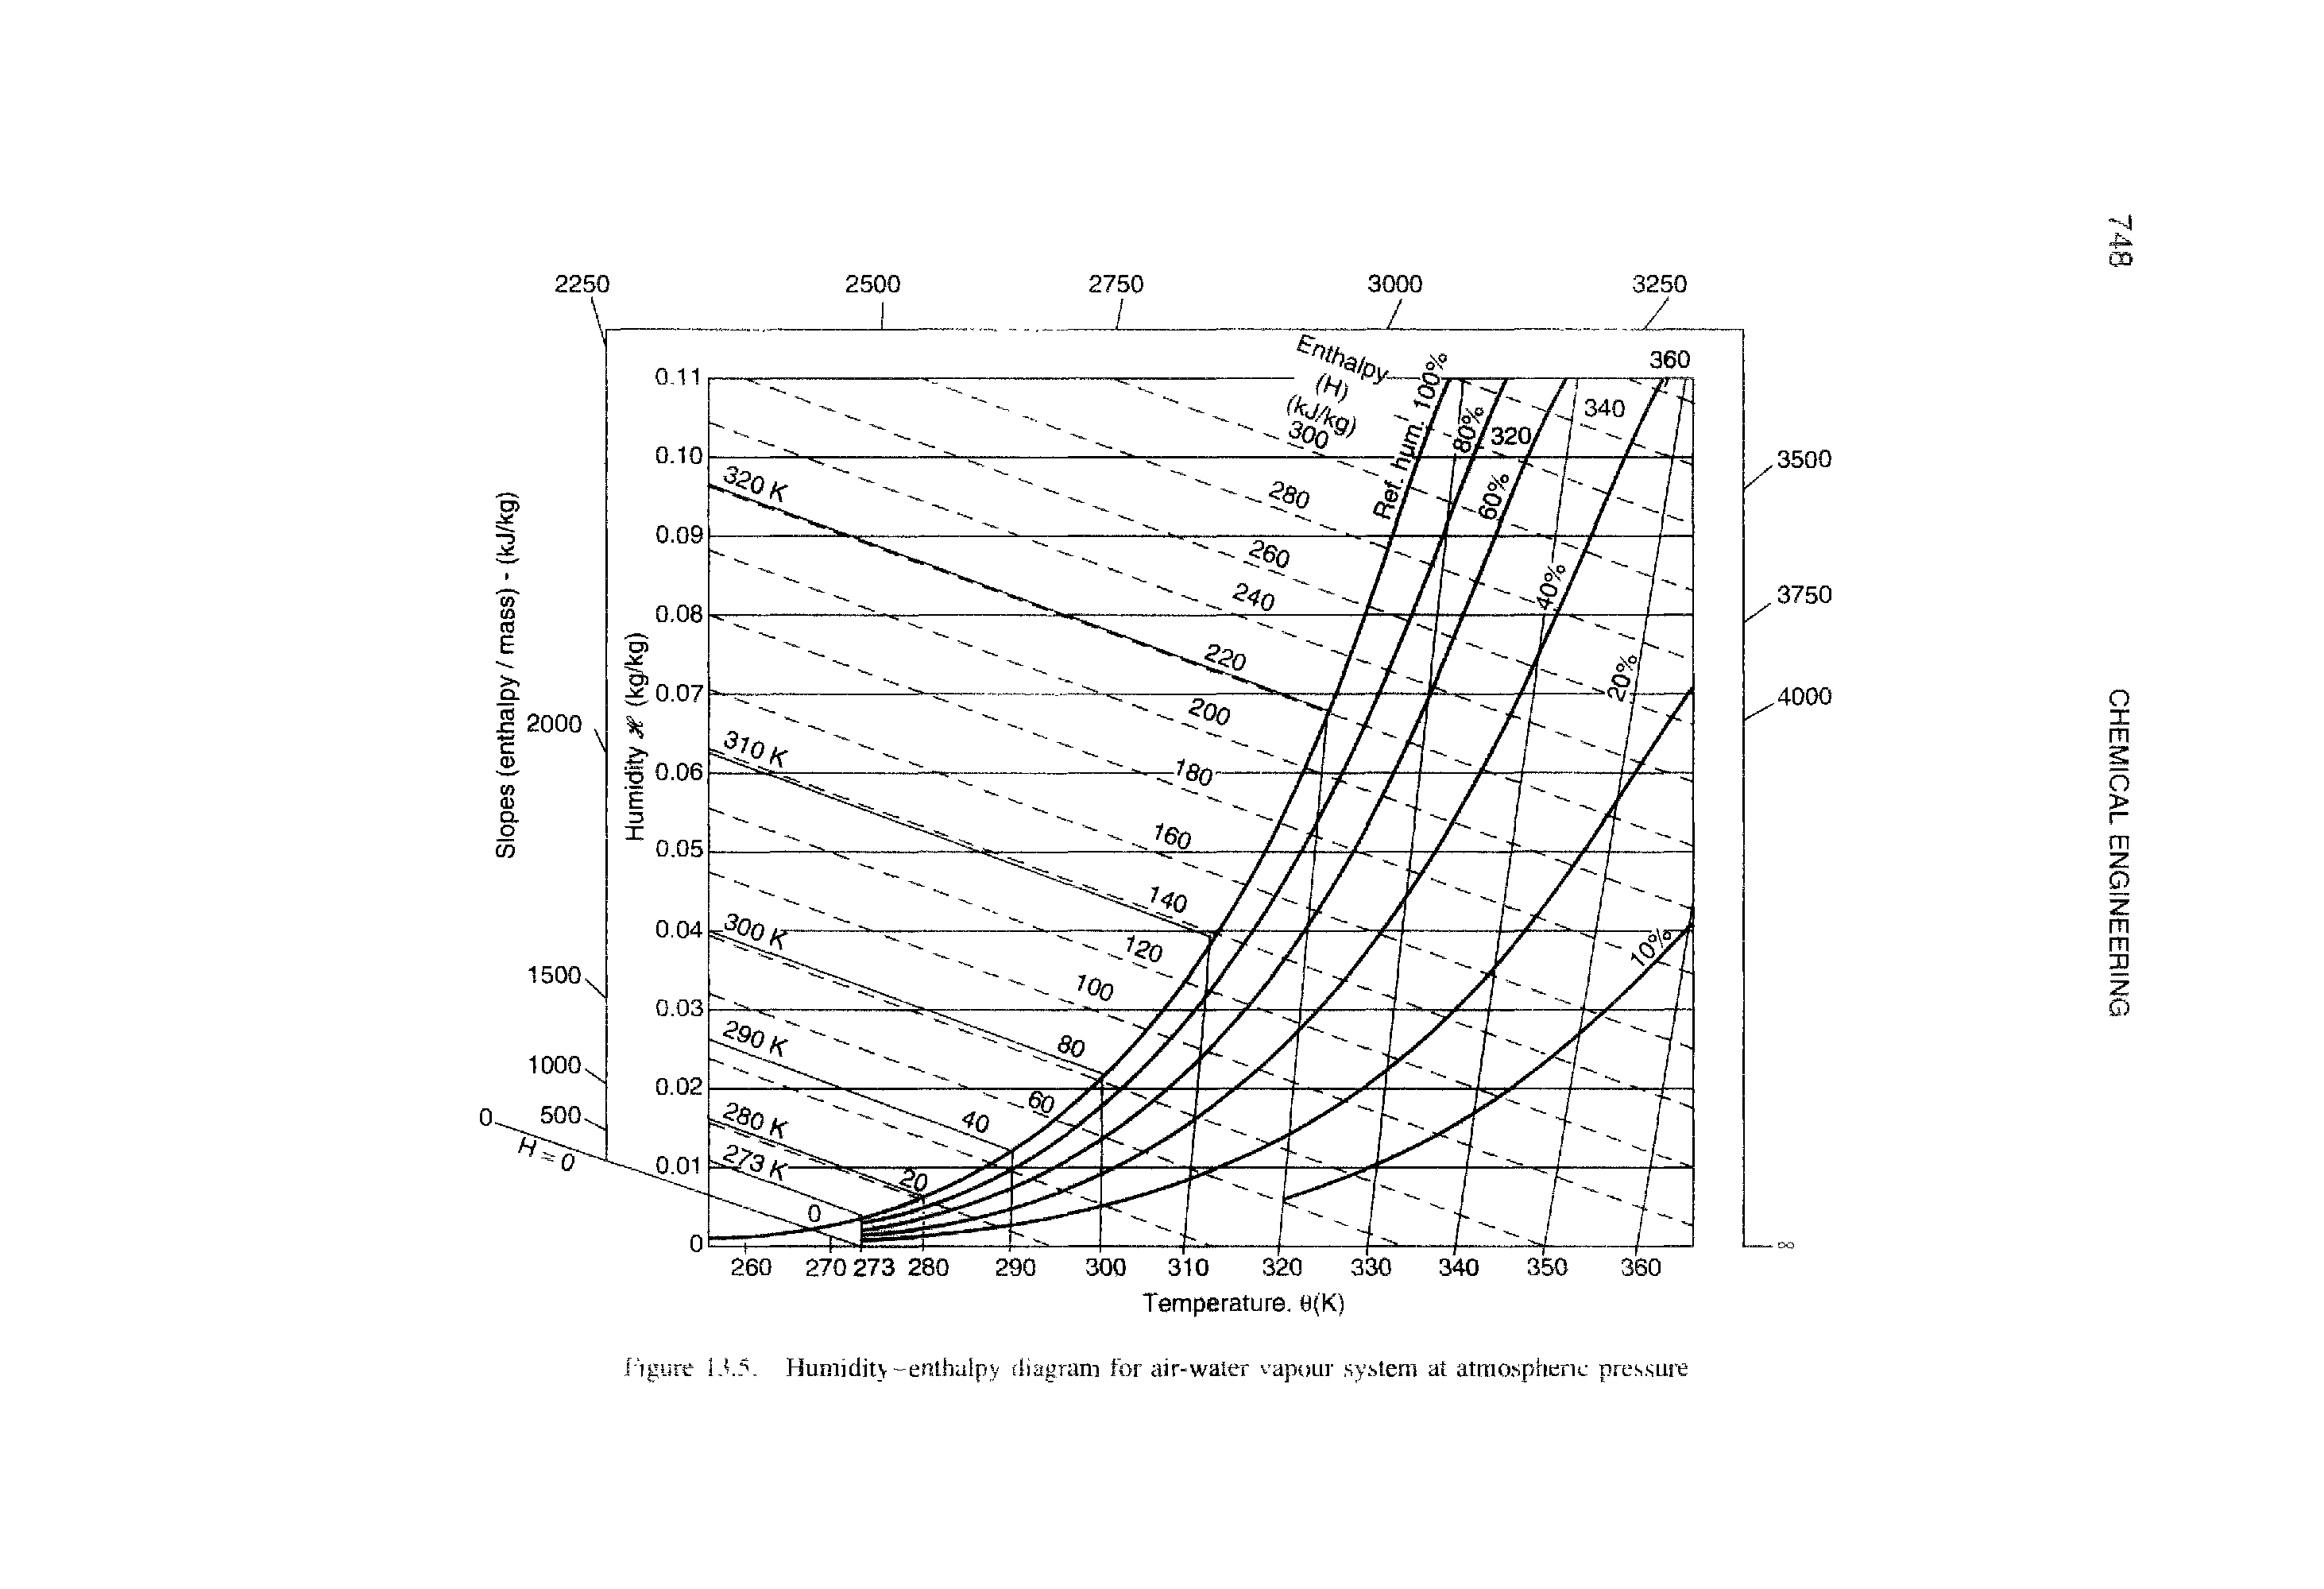 Figure 13.5. Humidity-enthalpy diagram for air-water vapour system at atmospheric pressure...